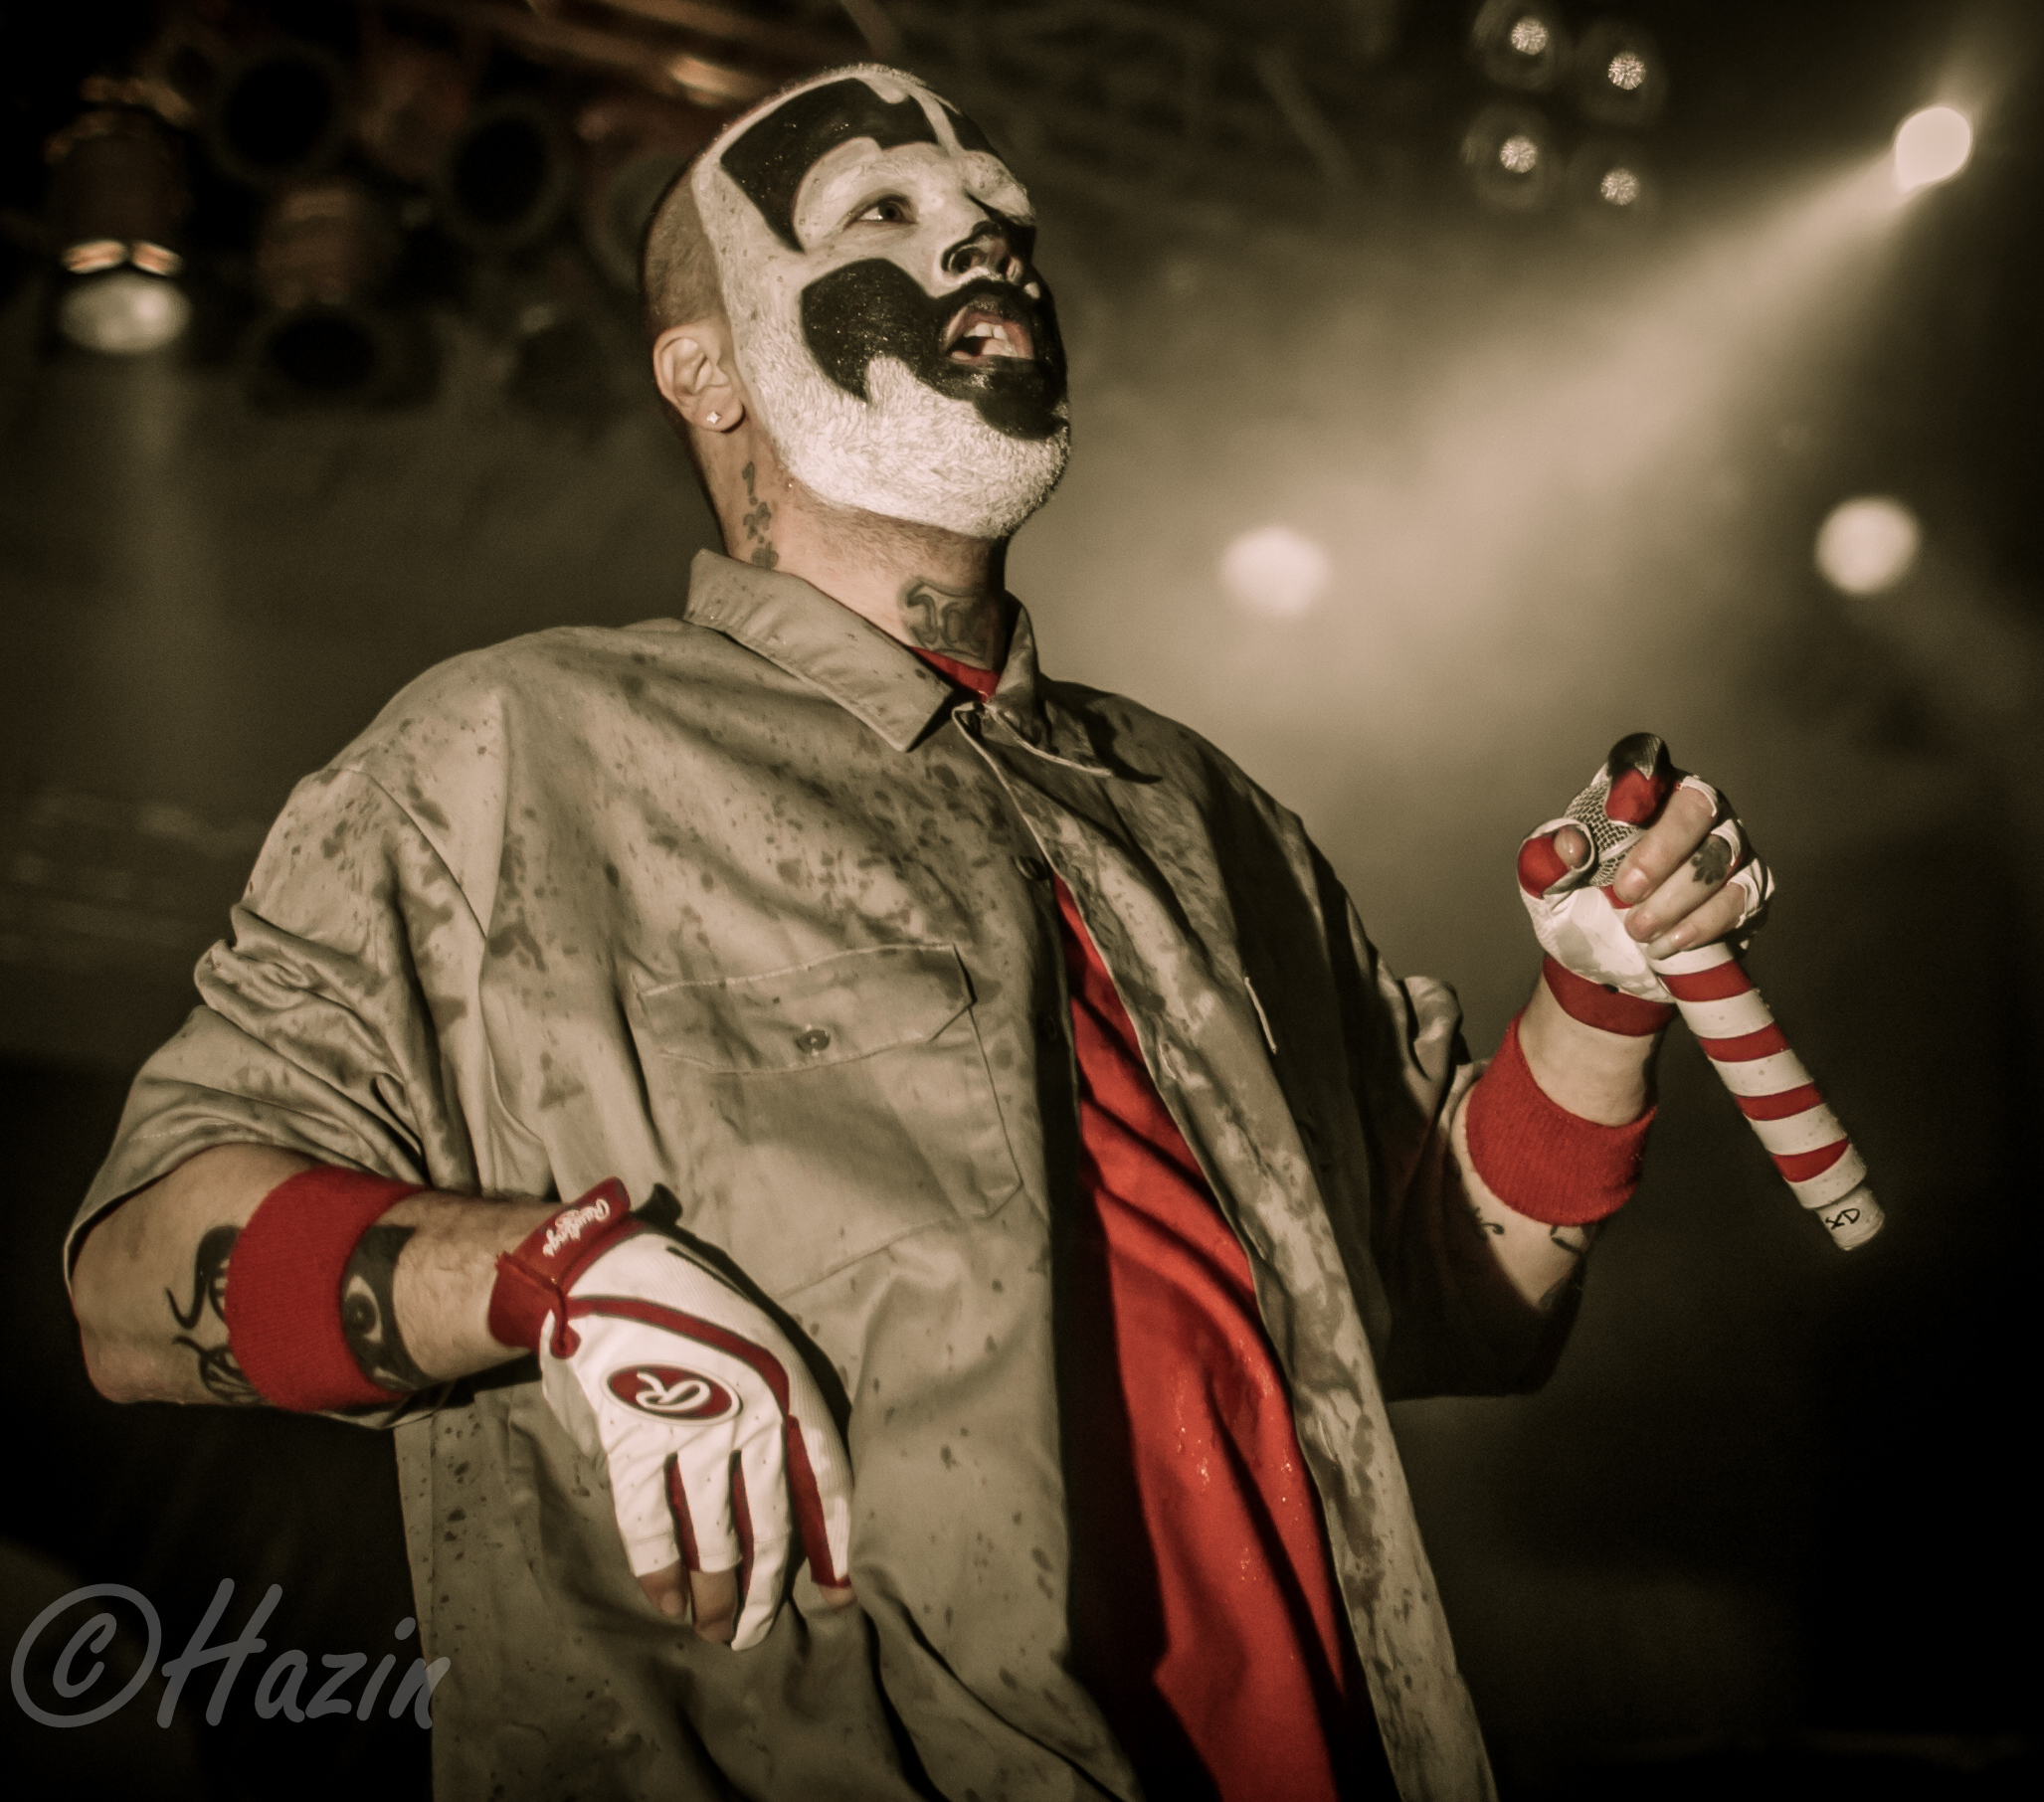 Pictures of Juggalo Day from Hazin (of TJF) and MonkeysOnCrack are UP